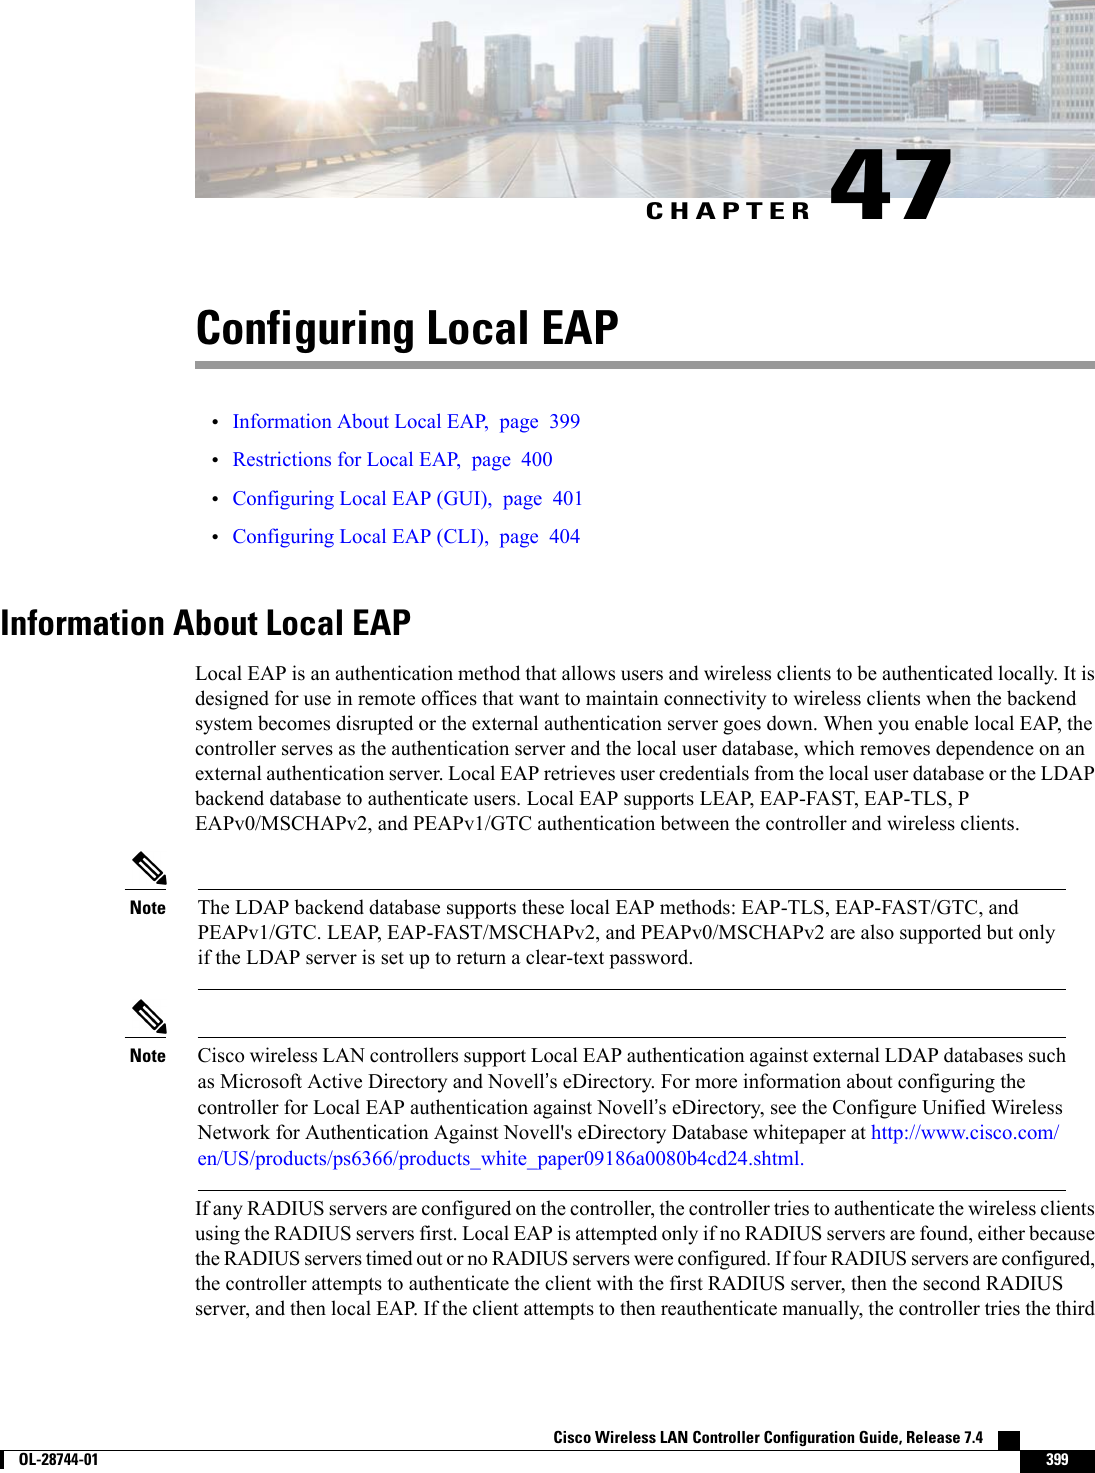 CHAPTER 47Configuring Local EAP•Information About Local EAP, page 399•Restrictions for Local EAP, page 400•Configuring Local EAP (GUI), page 401•Configuring Local EAP (CLI), page 404Information About Local EAPLocal EAP is an authentication method that allows users and wireless clients to be authenticated locally. It isdesigned for use in remote offices that want to maintain connectivity to wireless clients when the backendsystem becomes disrupted or the external authentication server goes down. When you enable local EAP, thecontroller serves as the authentication server and the local user database, which removes dependence on anexternal authentication server. Local EAP retrieves user credentials from the local user database or the LDAPbackend database to authenticate users. Local EAP supports LEAP, EAP-FAST, EAP-TLS, PEAPv0/MSCHAPv2, and PEAPv1/GTC authentication between the controller and wireless clients.The LDAP backend database supports these local EAP methods: EAP-TLS, EAP-FAST/GTC, andPEAPv1/GTC. LEAP, EAP-FAST/MSCHAPv2, and PEAPv0/MSCHAPv2 are also supported but onlyif the LDAP server is set up to return a clear-text password.NoteCisco wireless LAN controllers support Local EAP authentication against external LDAP databases suchas Microsoft Active Directory and Novell’s eDirectory. For more information about configuring thecontroller for Local EAP authentication against Novell’s eDirectory, see the Configure Unified WirelessNetwork for Authentication Against Novell&apos;s eDirectory Database whitepaper at http://www.cisco.com/en/US/products/ps6366/products_white_paper09186a0080b4cd24.shtml.NoteIf any RADIUS servers are configured on the controller, the controller tries to authenticate the wireless clientsusing the RADIUS servers first. Local EAP is attempted only if no RADIUS servers are found, either becausethe RADIUS servers timed out or no RADIUS servers were configured. If four RADIUS servers are configured,the controller attempts to authenticate the client with the first RADIUS server, then the second RADIUSserver, and then local EAP. If the client attempts to then reauthenticate manually, the controller tries the thirdCisco Wireless LAN Controller Configuration Guide, Release 7.4        OL-28744-01 399